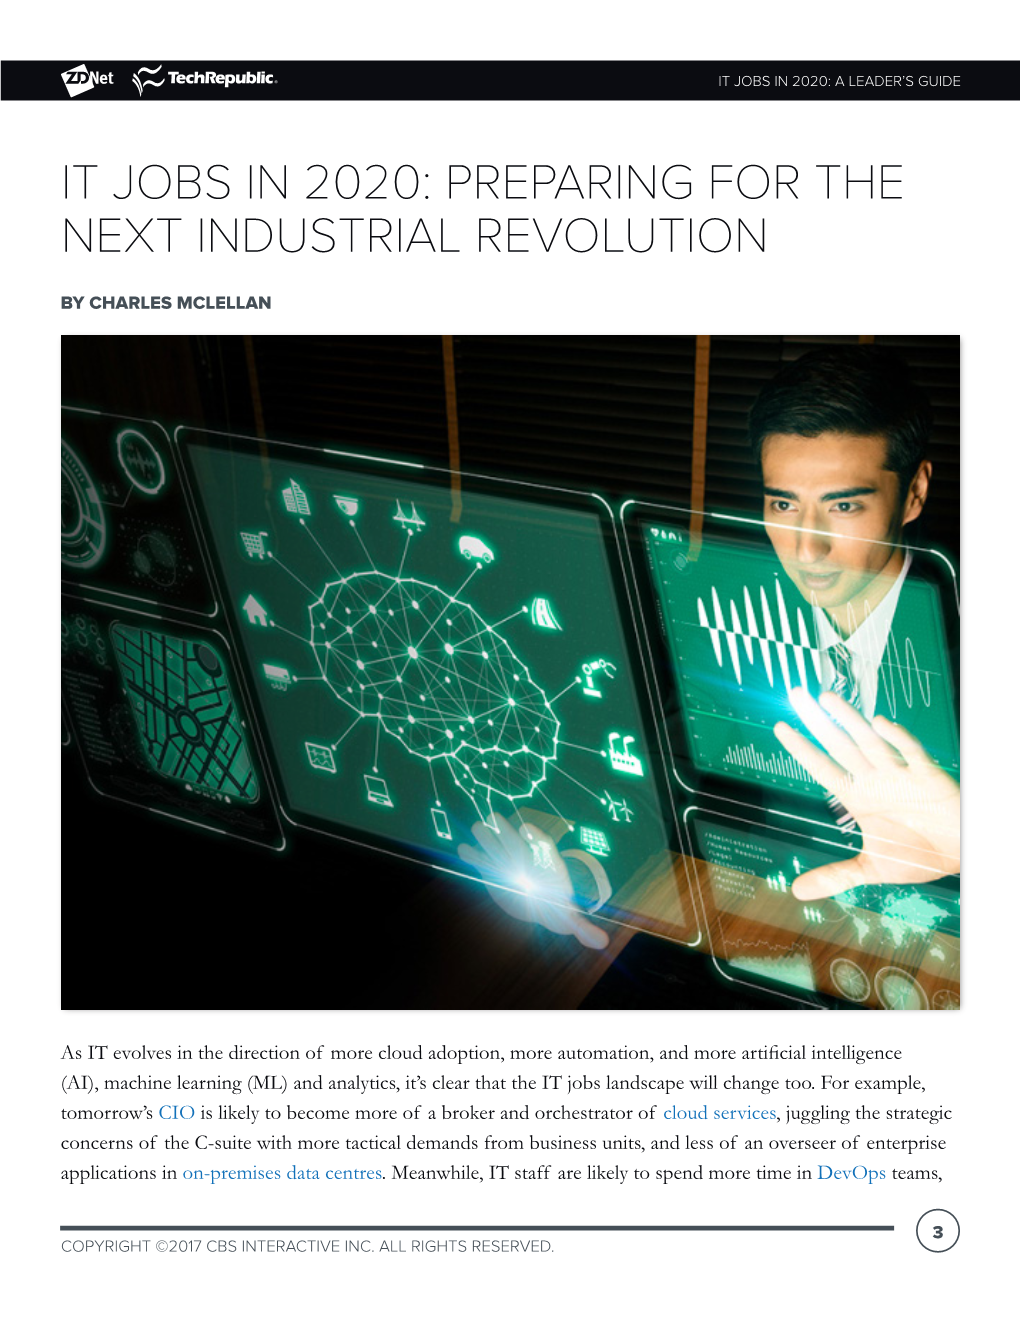 IT jobs in 2020: A leader’s guide